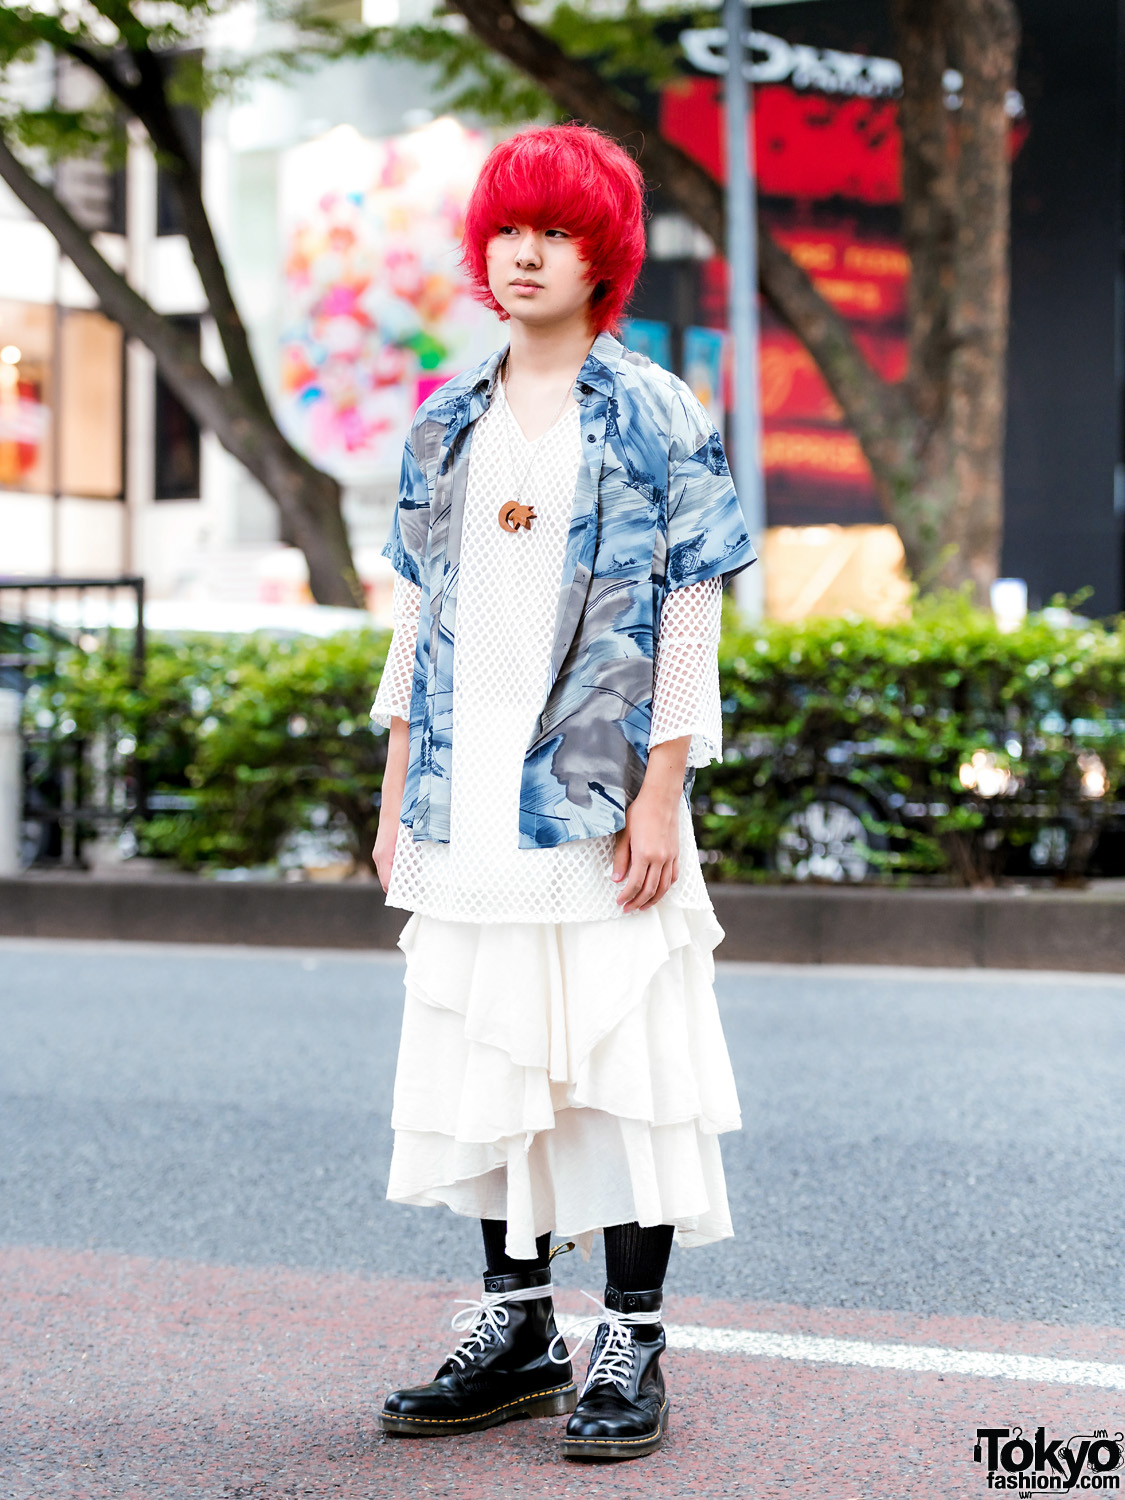 Vintage Harajuku Street Style w/ Red Bob, Mesh Top, Tiered Skirt & Dr. Martens Boots